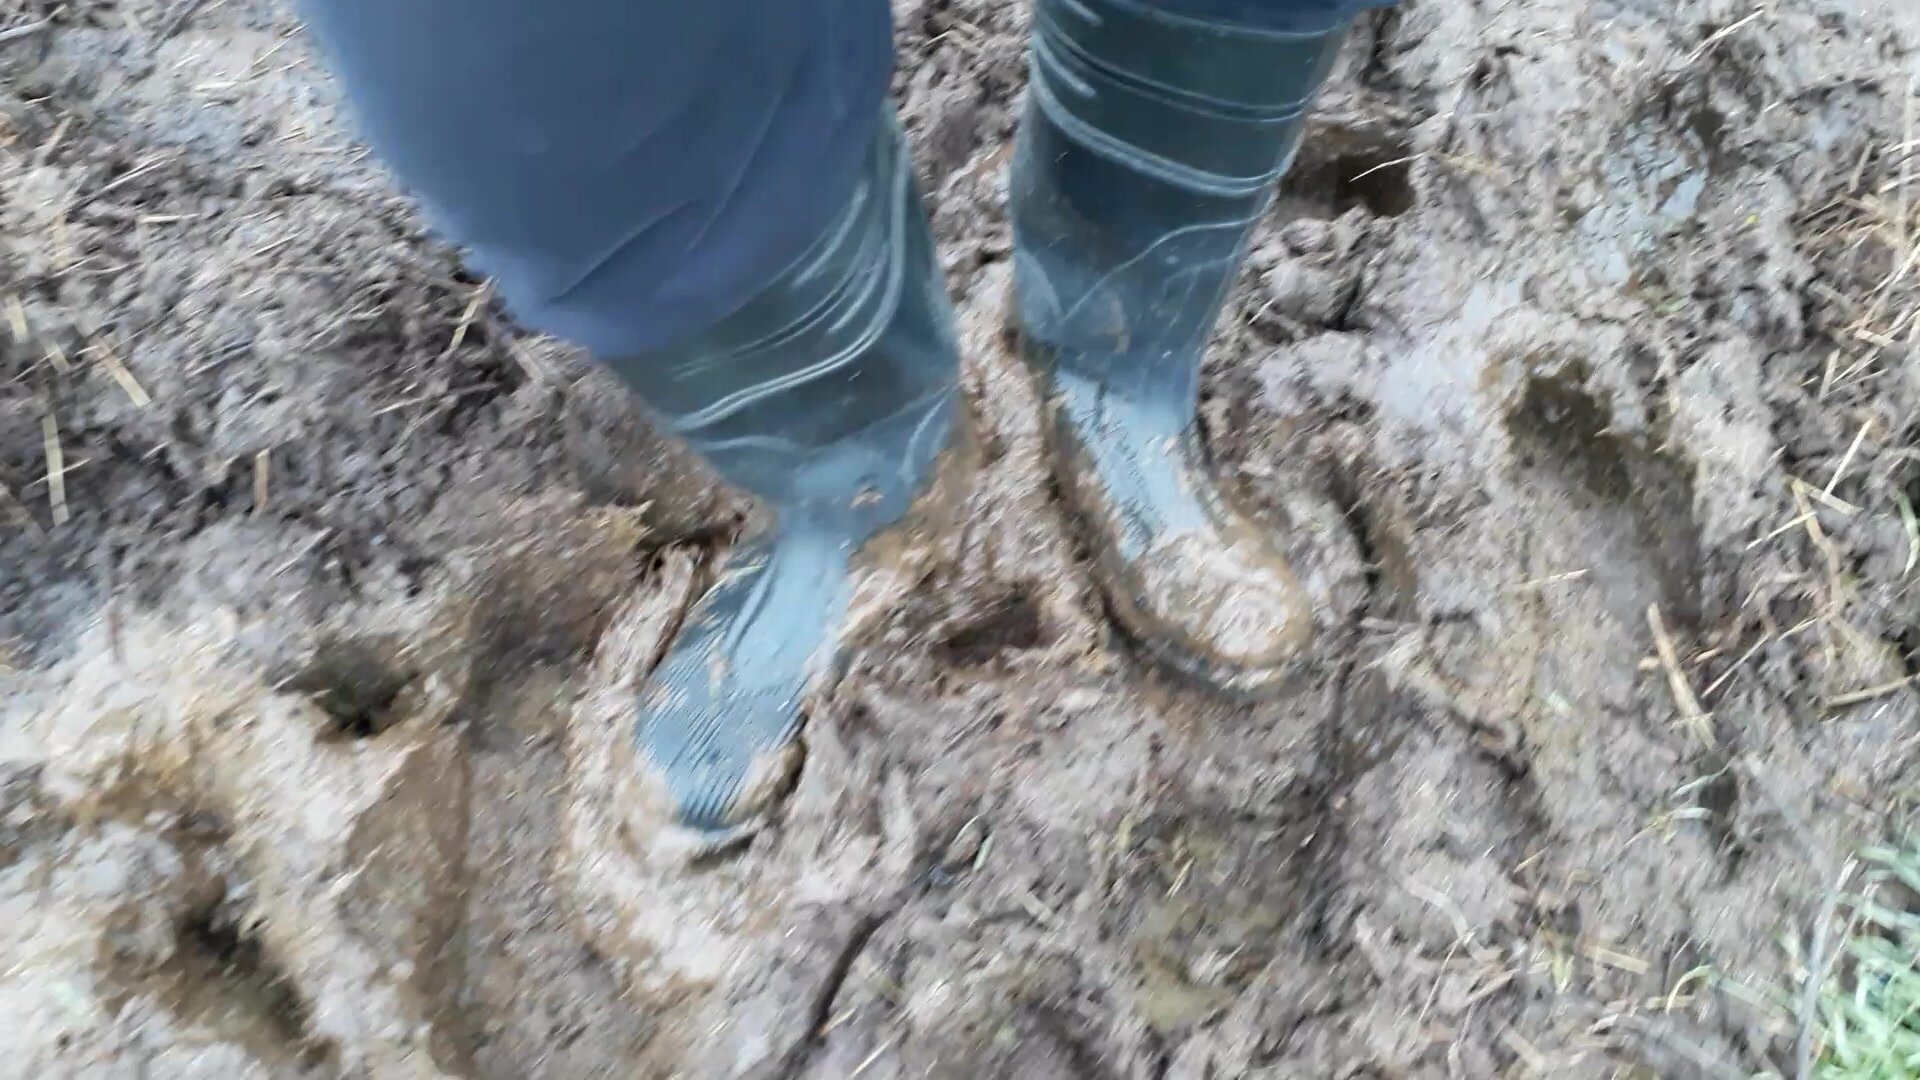 Rubber boots vs manure - video 2